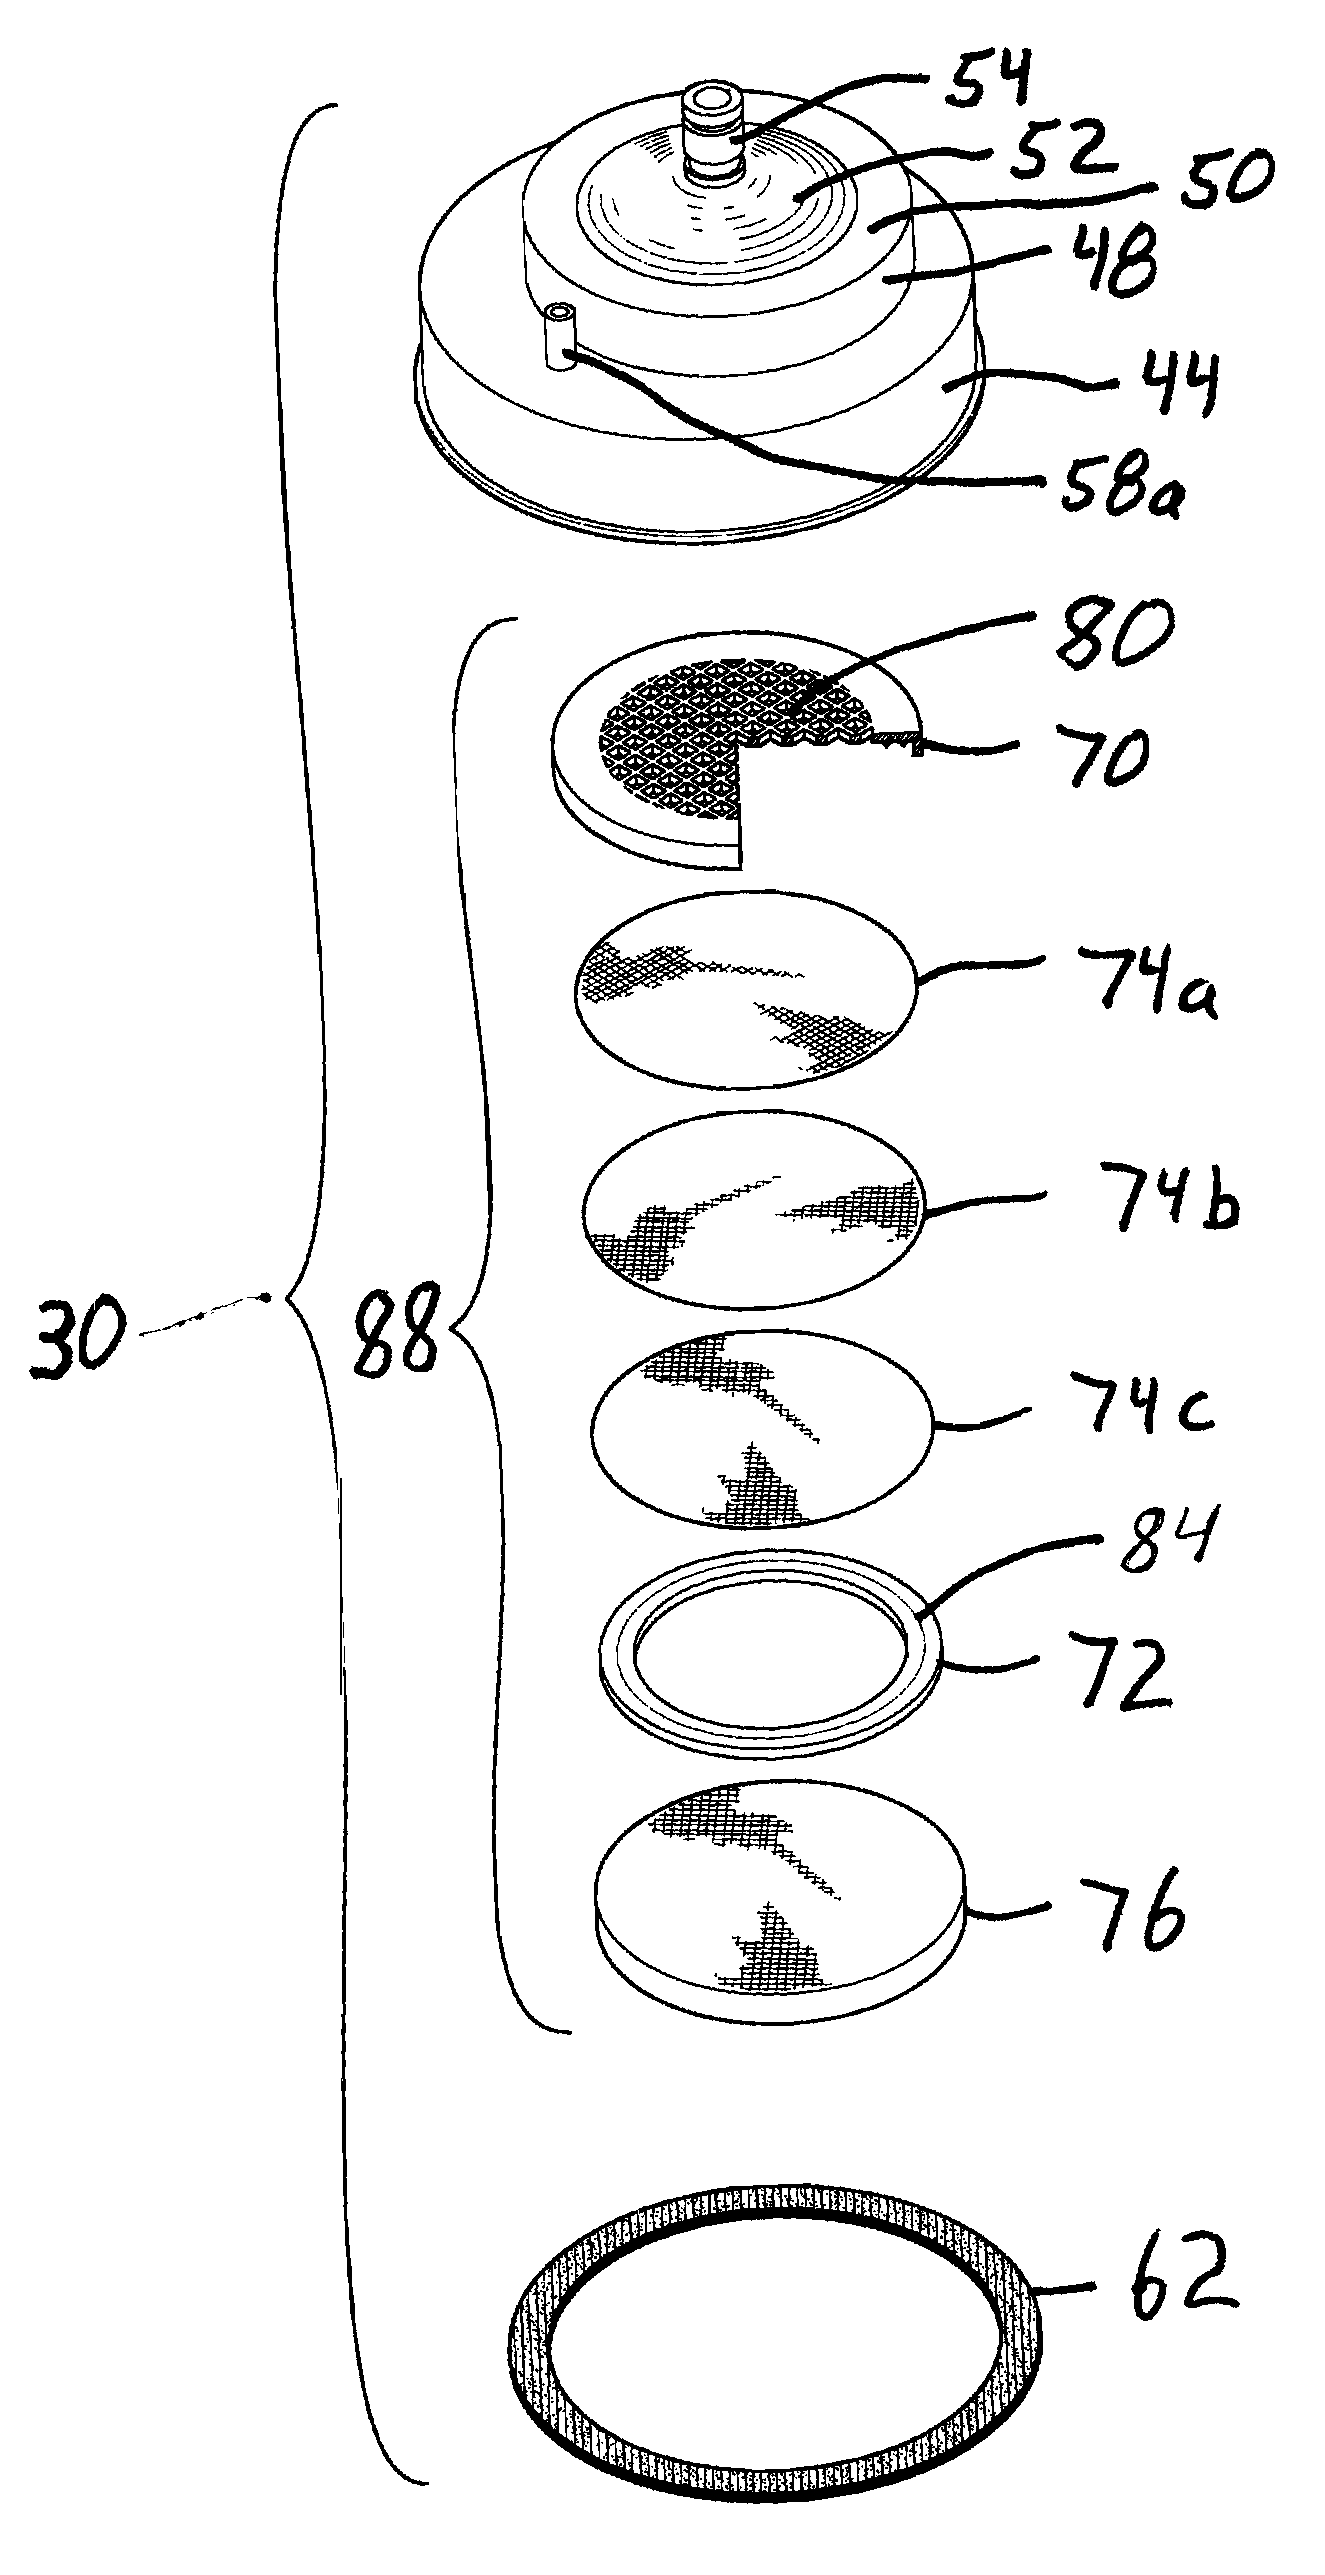 Cap with filter and transfer apparatus